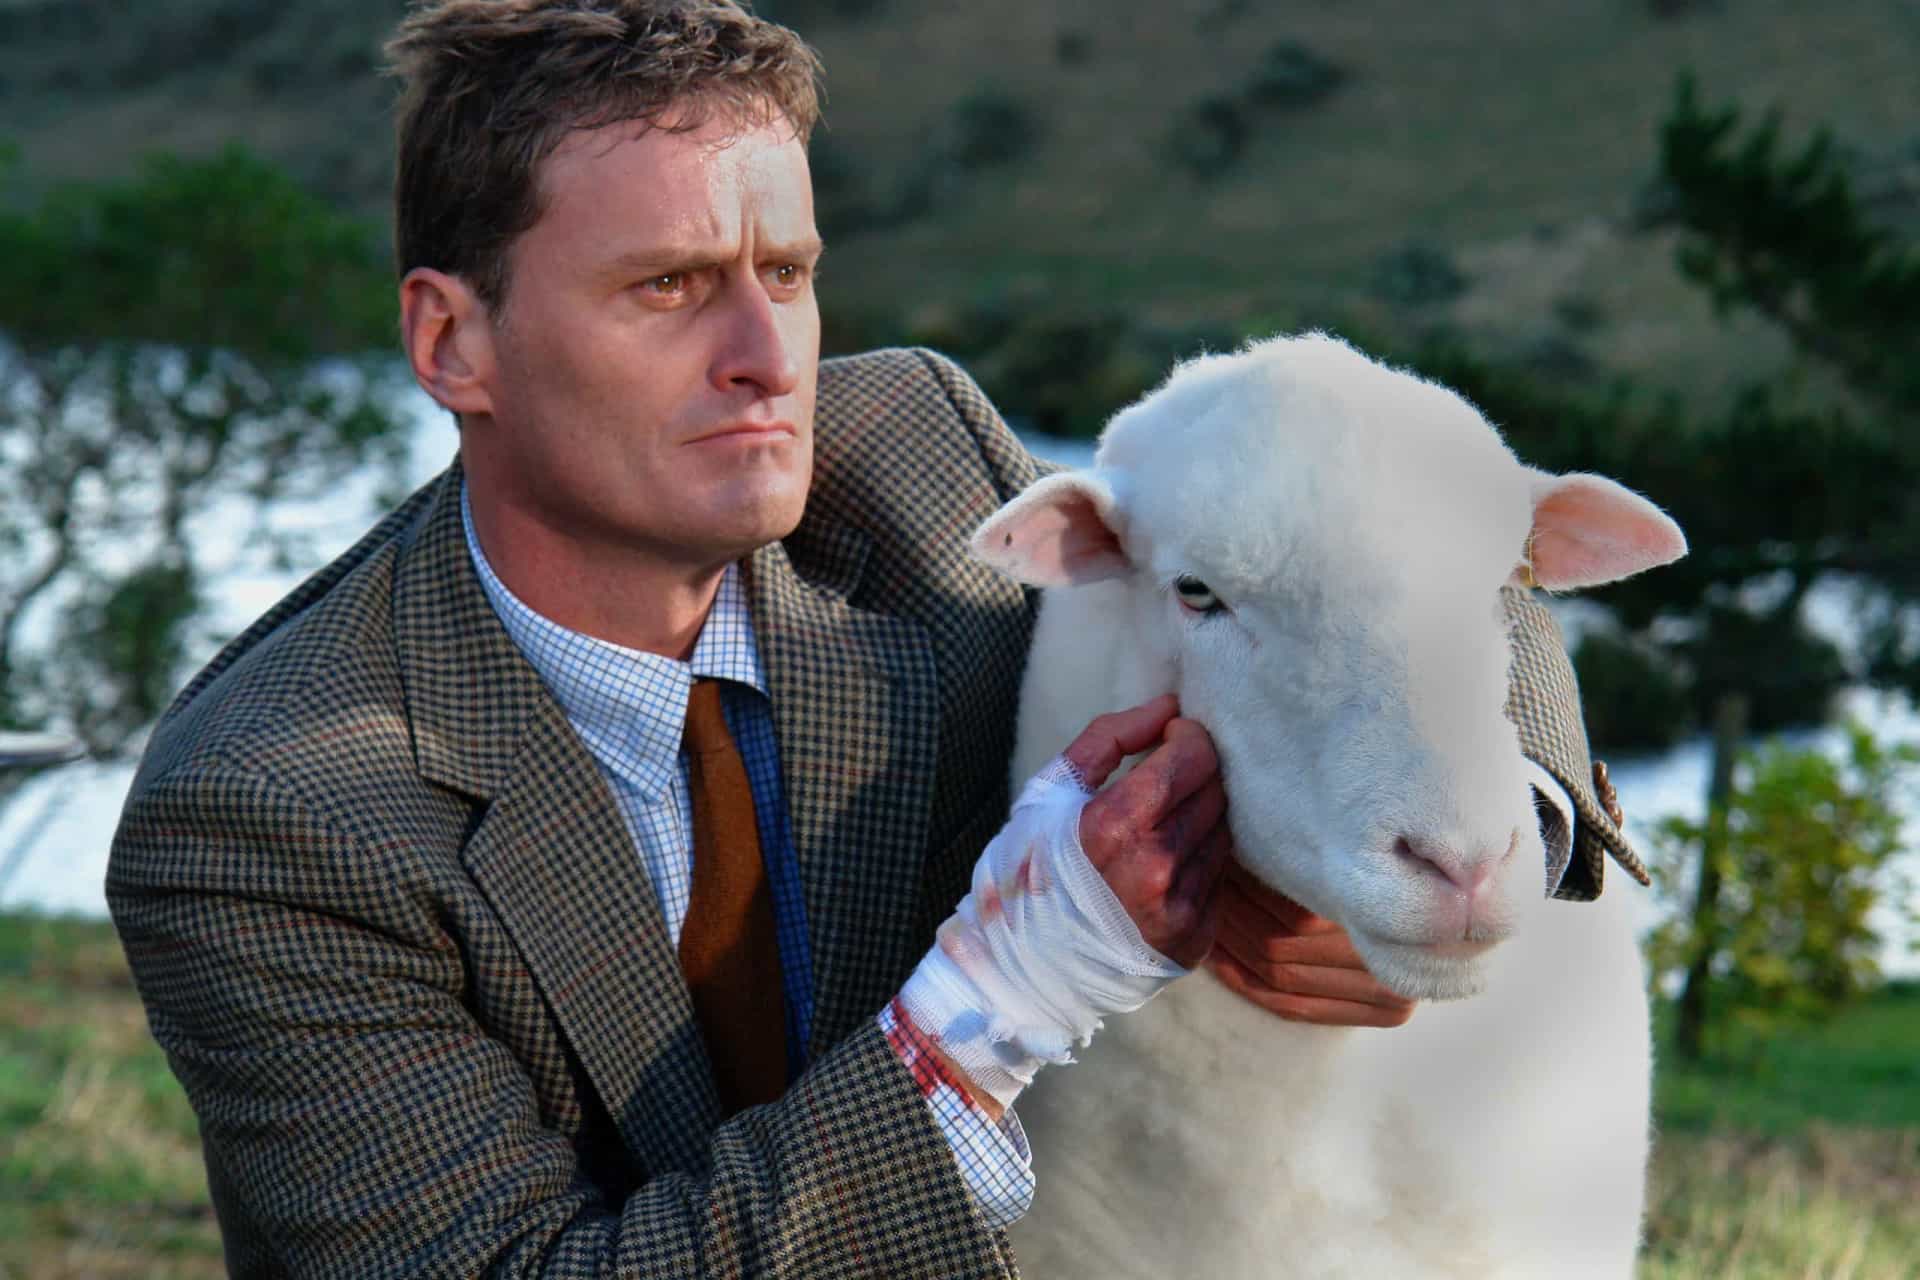 <p>The 2006 movie of the same name, however, is about a flock of sheep who turn evil following a genetic engineering experiment and devastate a farm in New Zealand.</p>